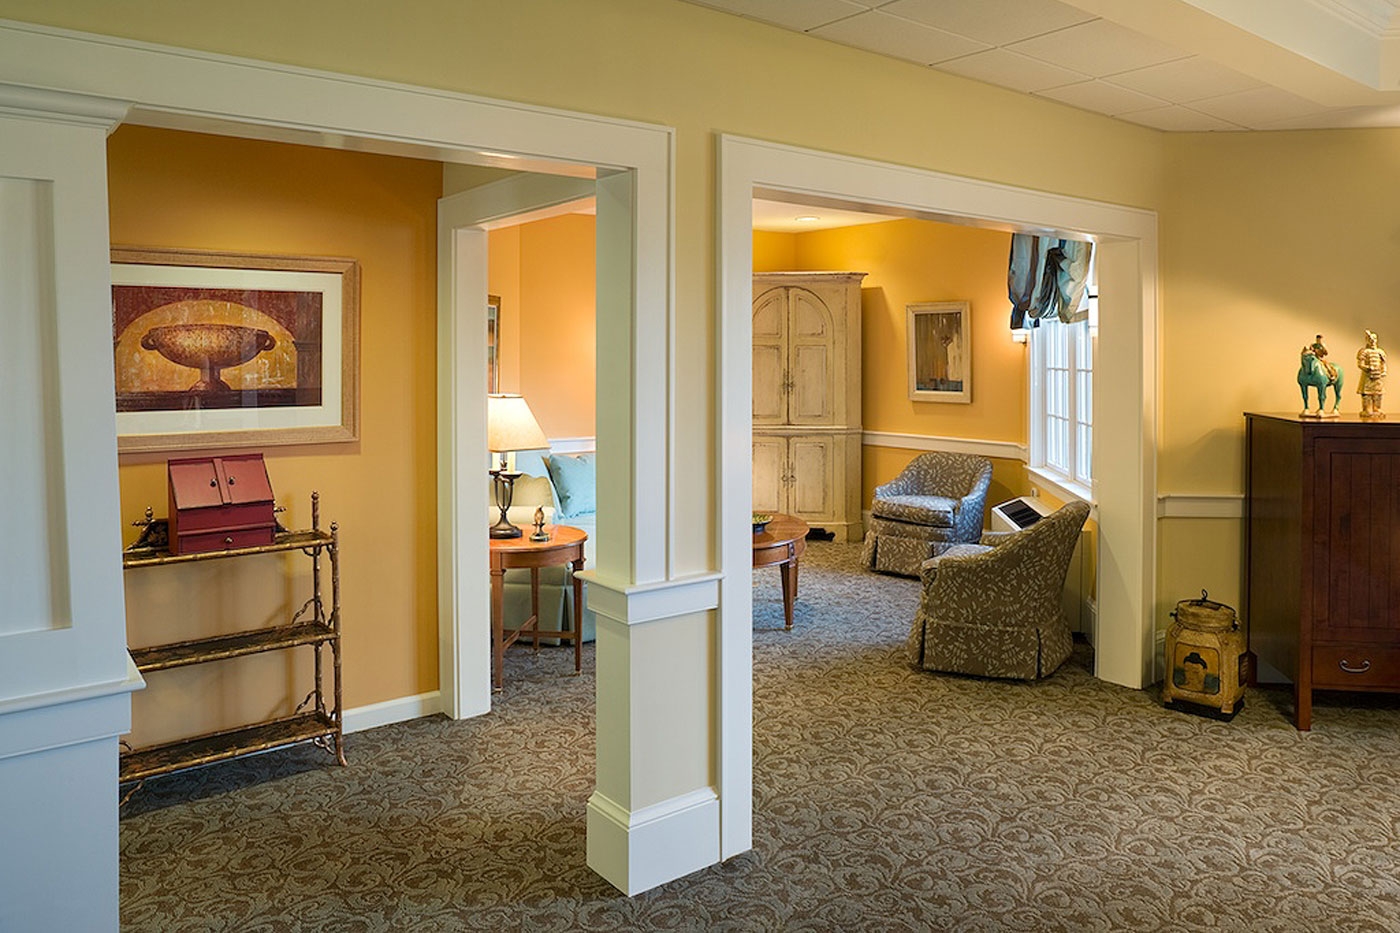 Assisted living & Memory care interior design by Methuen-headquartered Wellesley Design Consultants